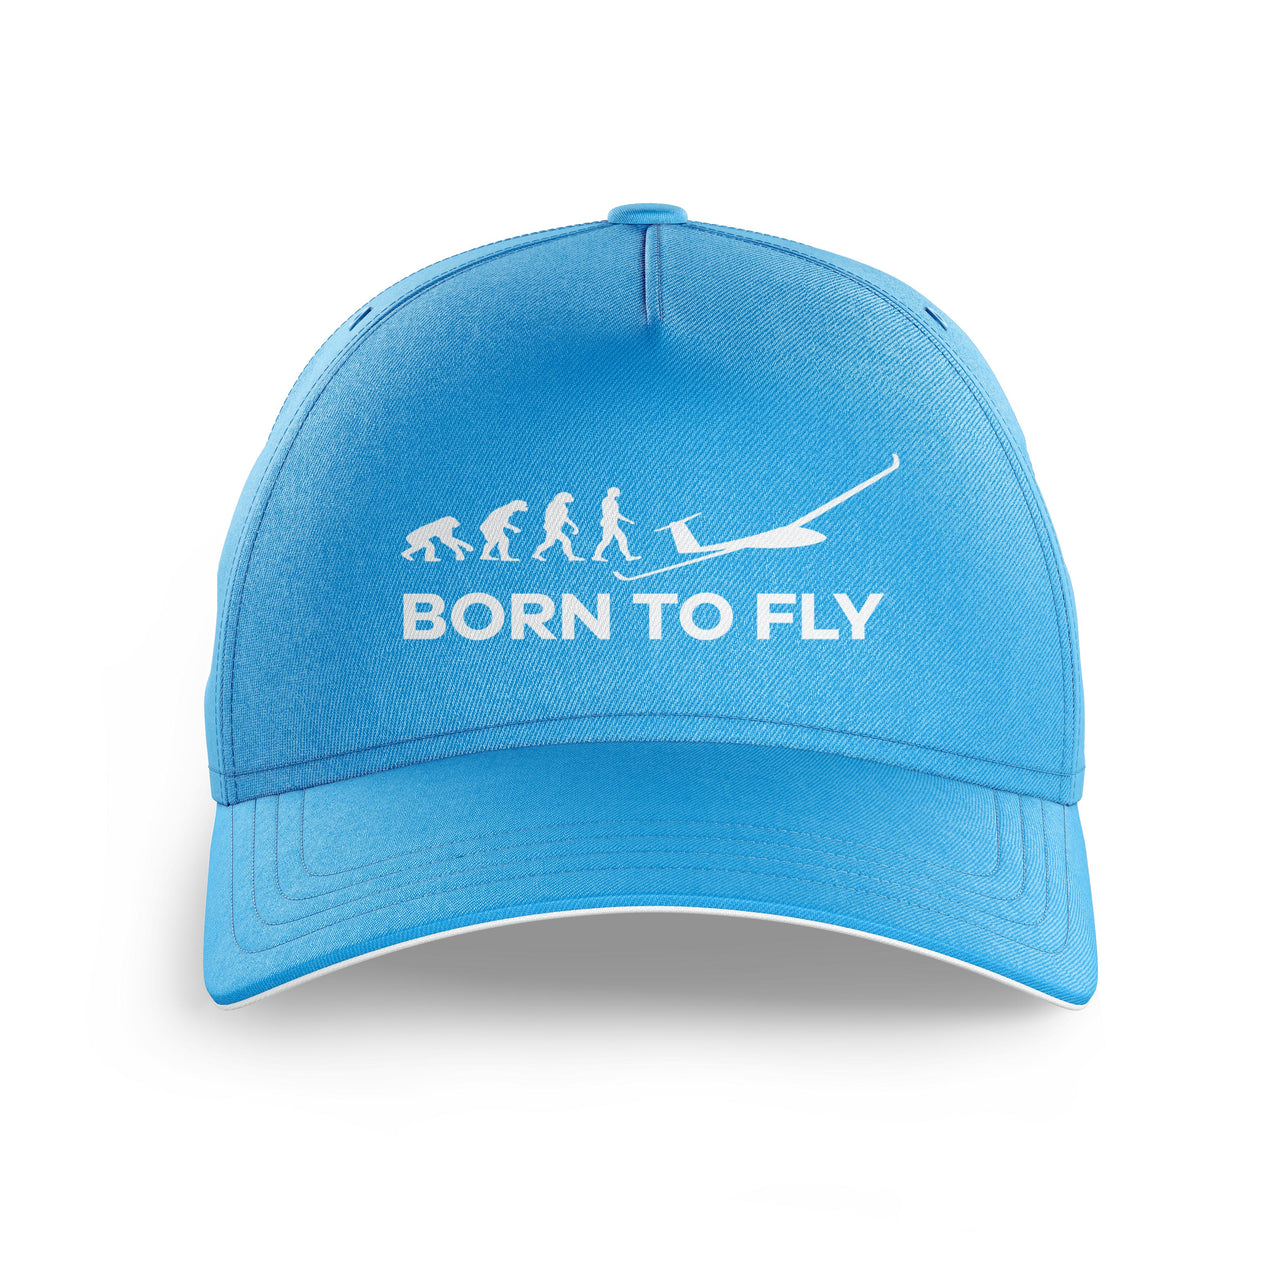 Born To Fly Glider Printed Hats